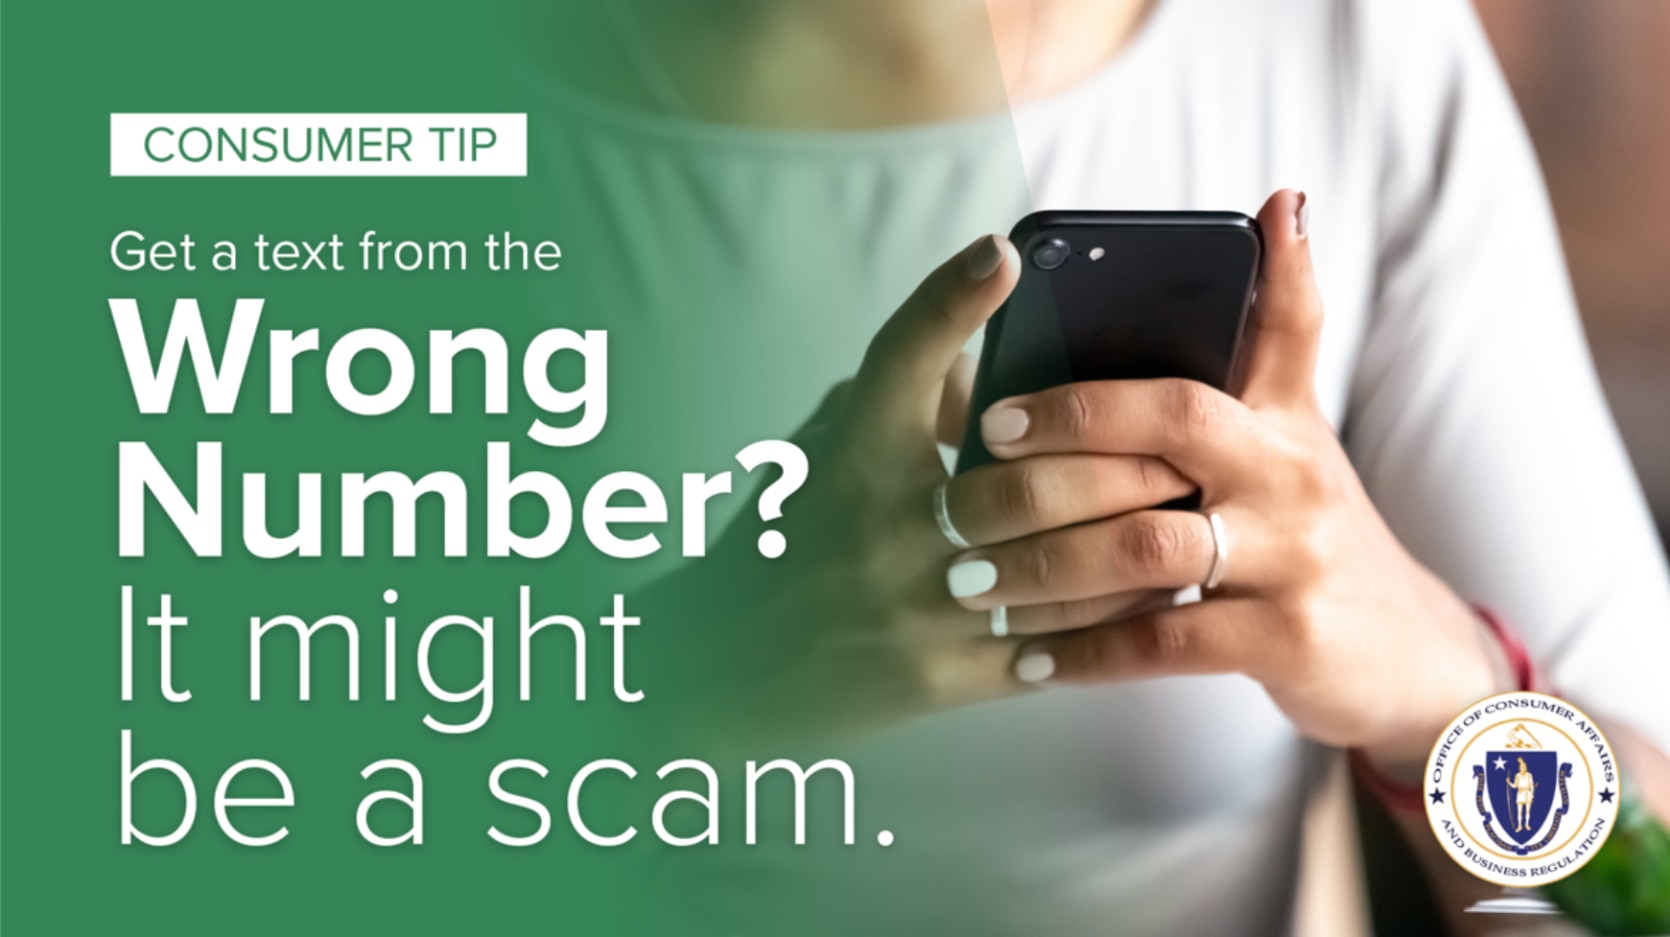 Phone call from unknown number late at night. Scam, fraud or